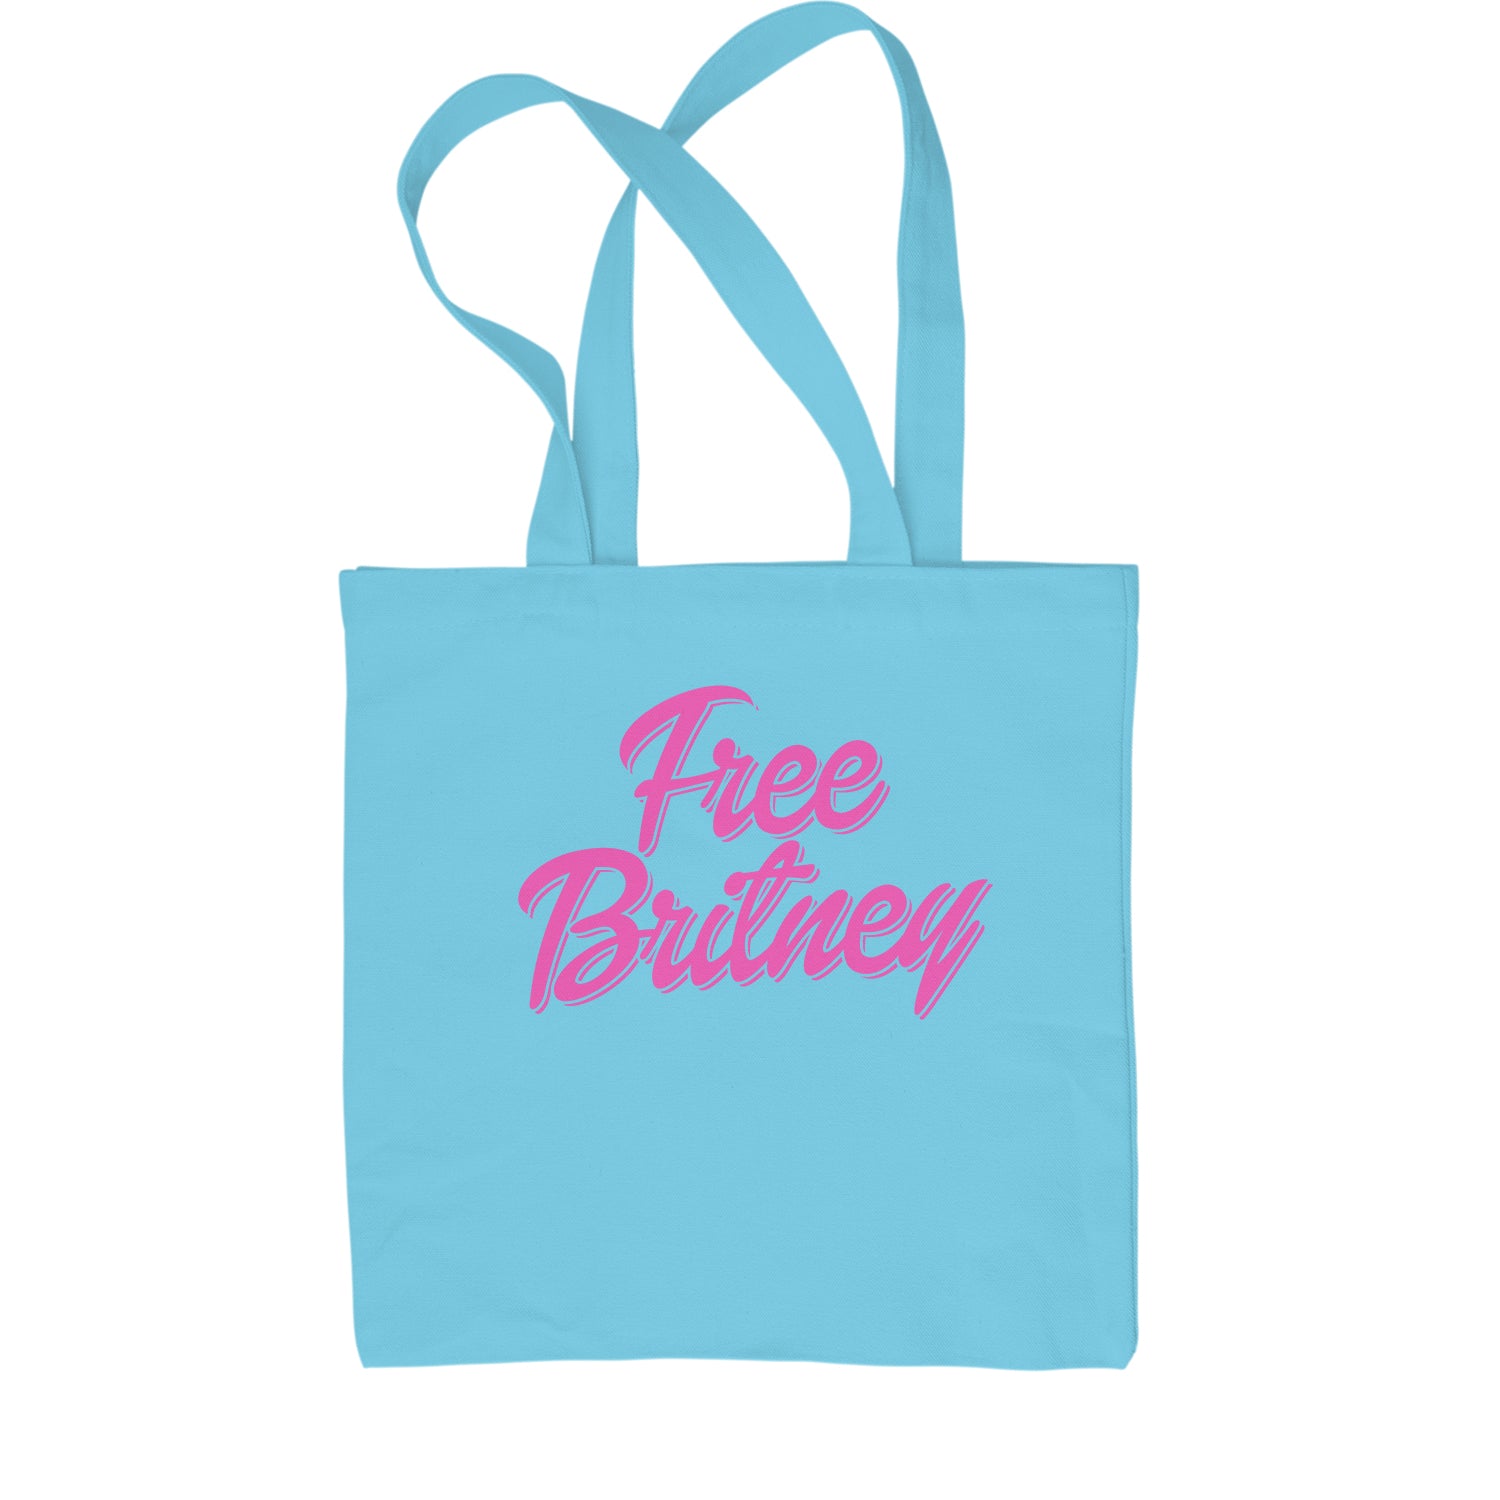 Pink Free Britney Shopping Tote Bag again, did, I, it, more, music, one, oops, pop, spears, time, toxic by Expression Tees